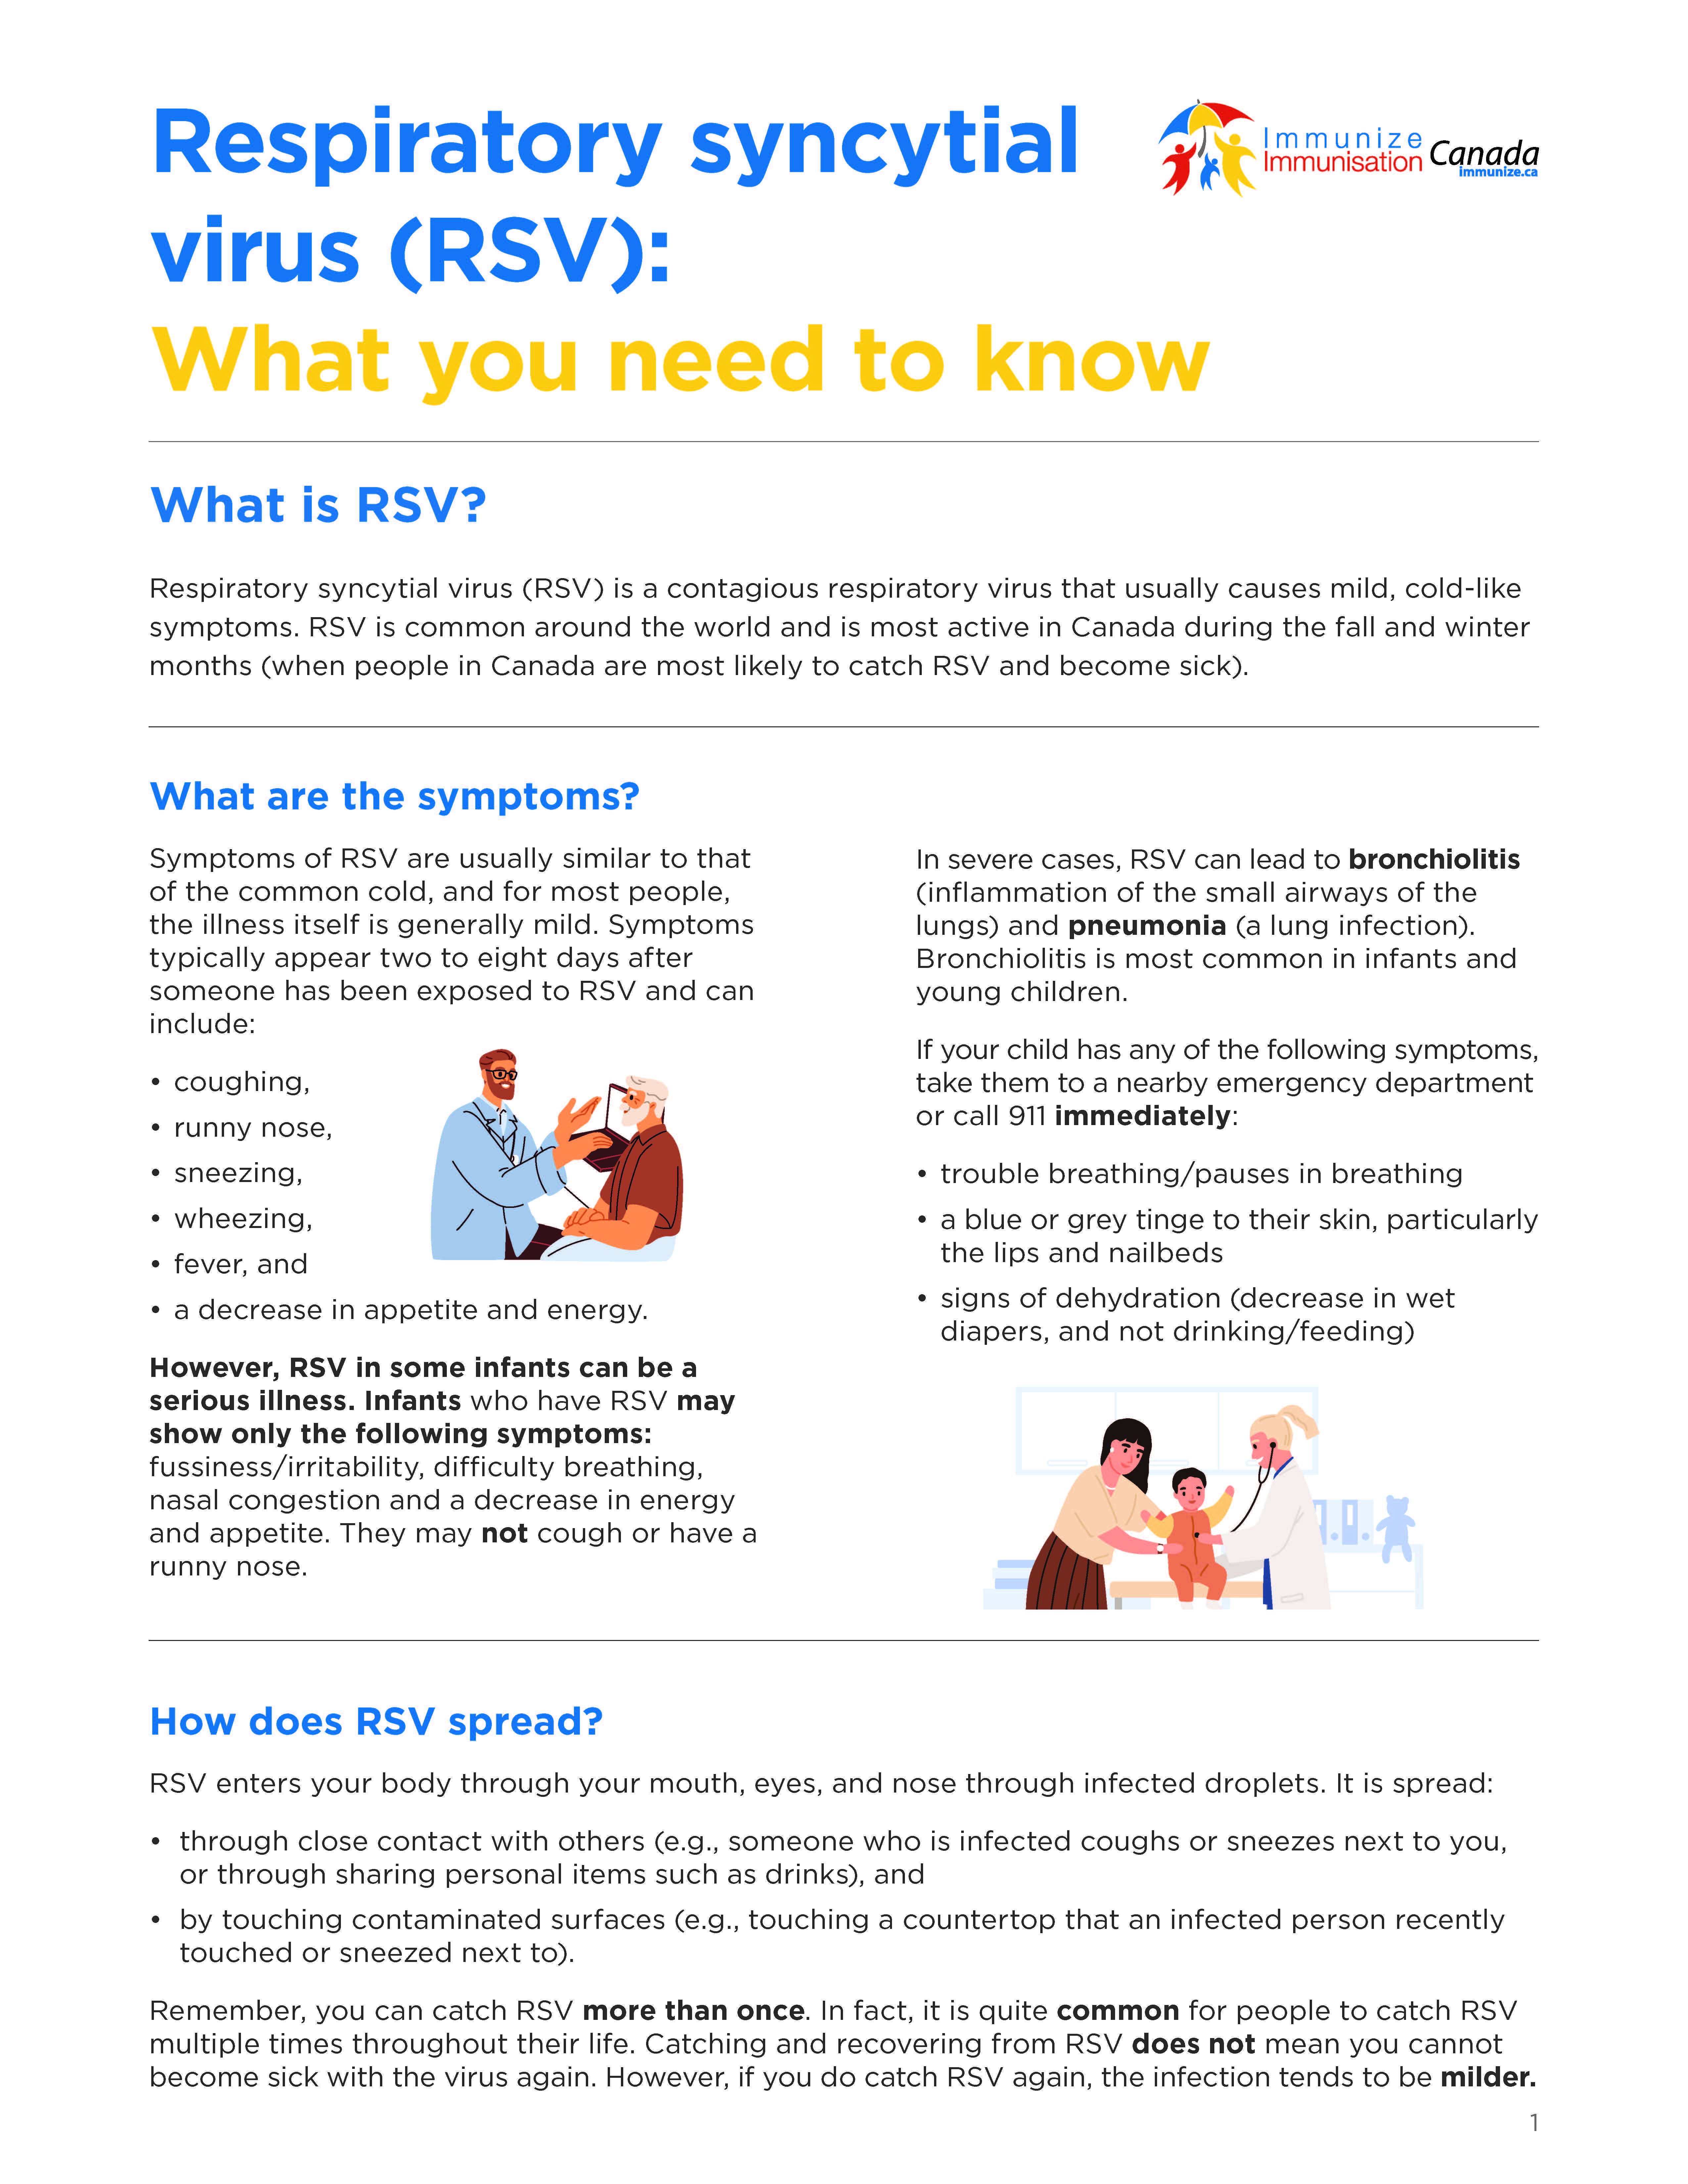 ​Respiratory syncytial virus (RSV): What you need to know